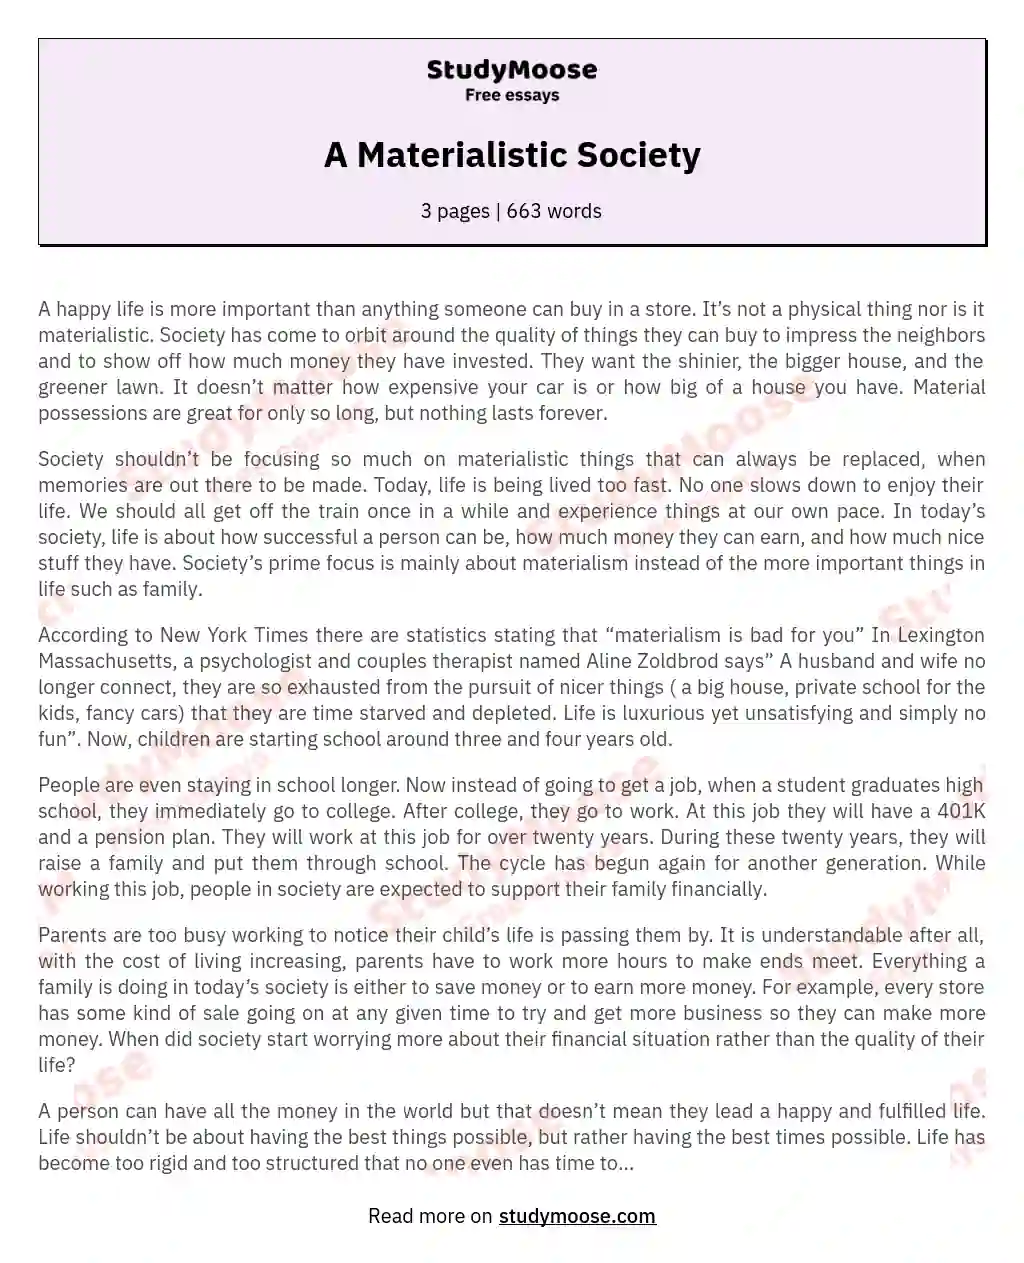 A Materialistic Society essay